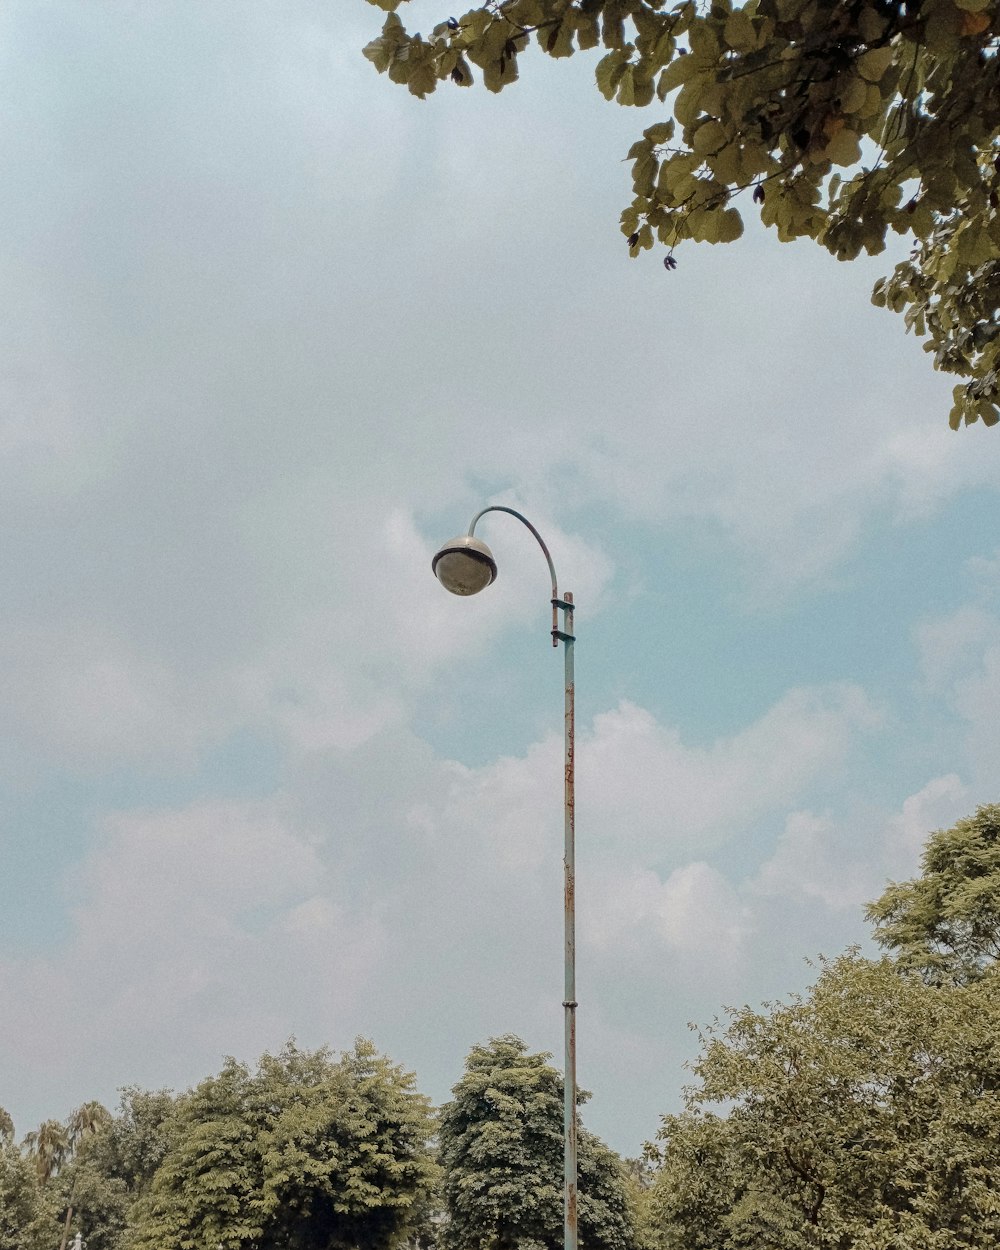 a street light in the middle of a park